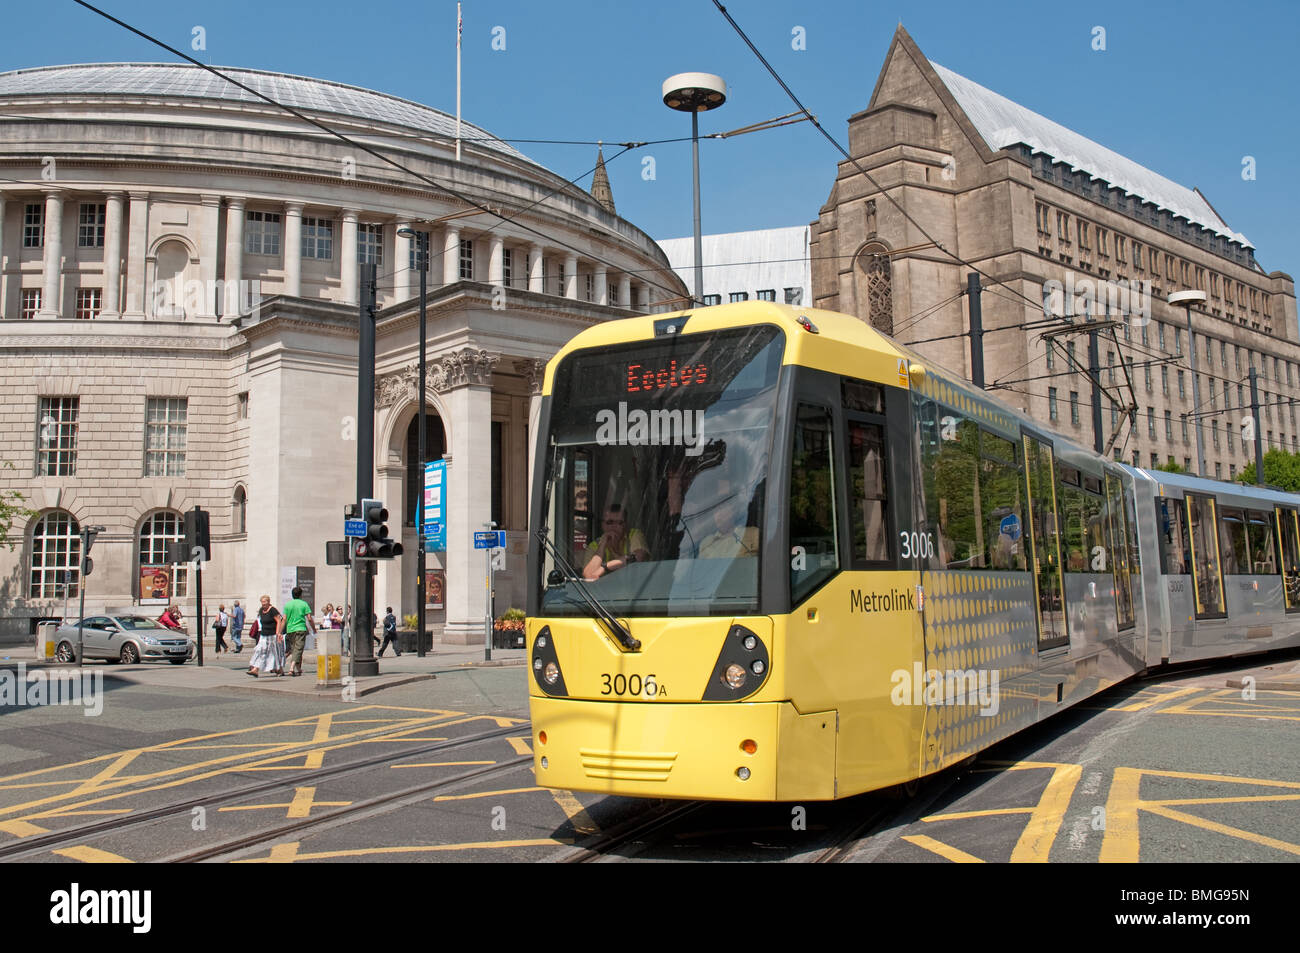 Metrolink tram in St Peter's Square,Mancheser,UK.Central library in the background. Stock Photo